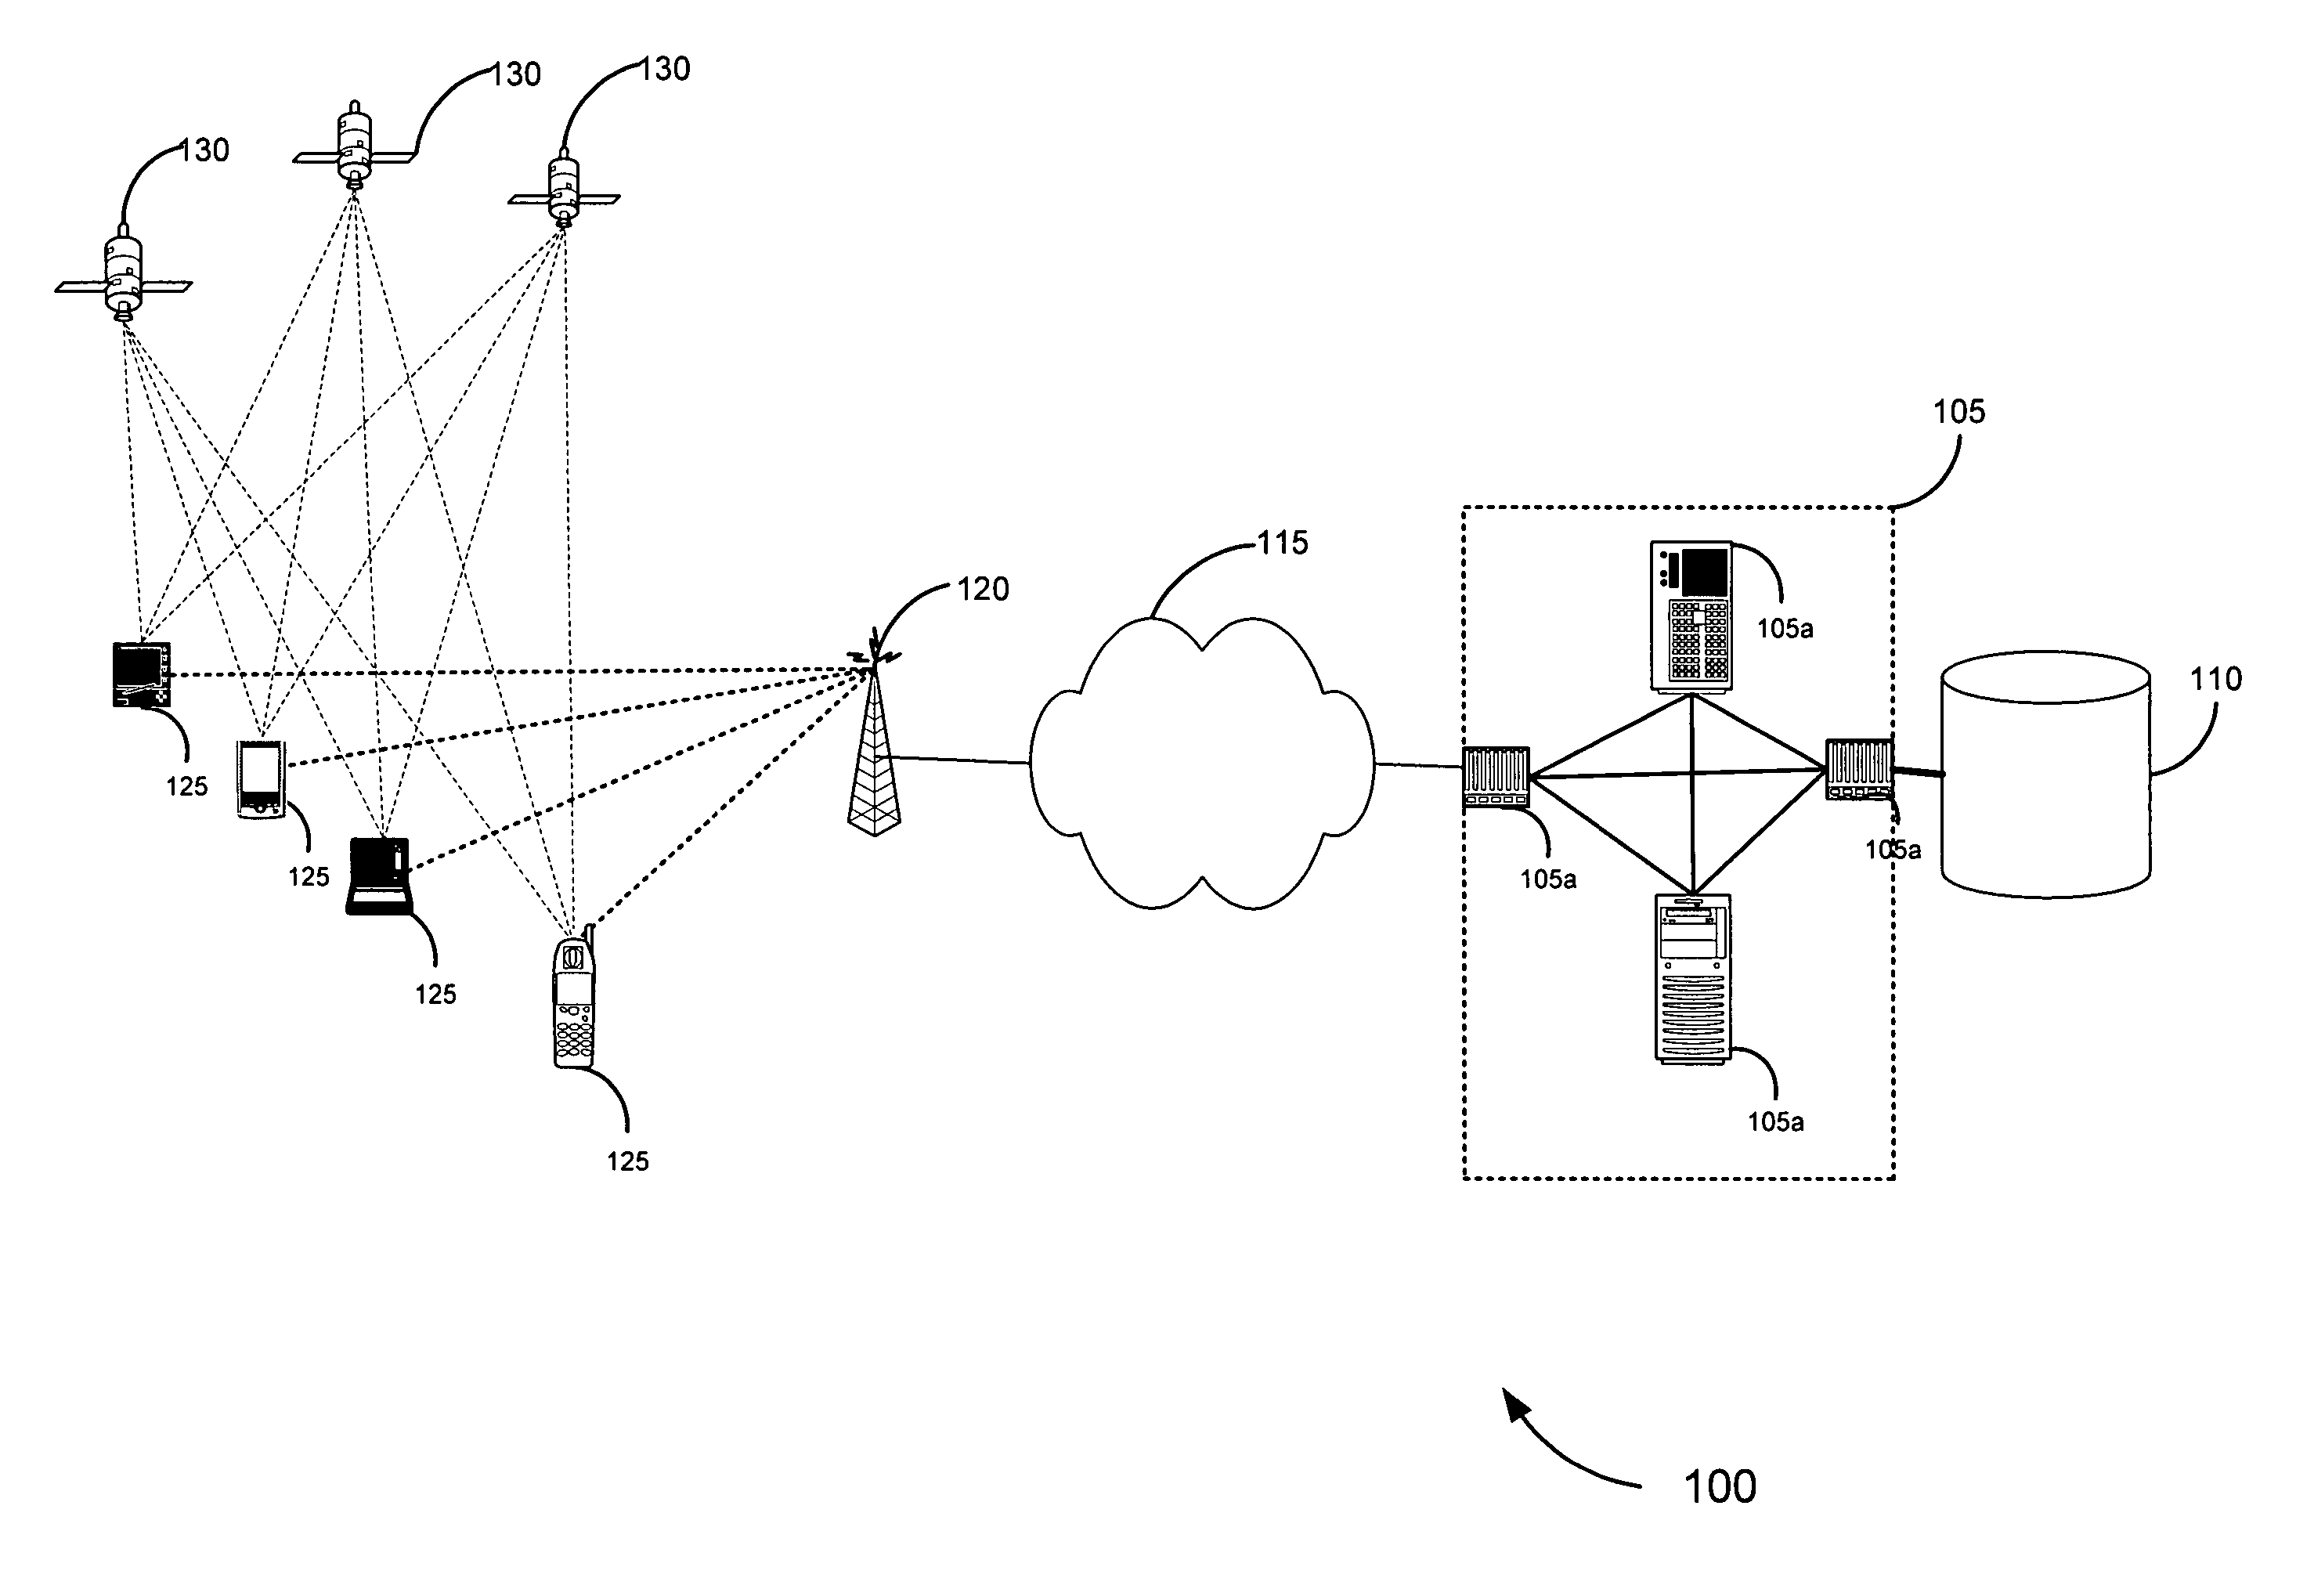 Mapping the location of a mobile communications device systems and methods